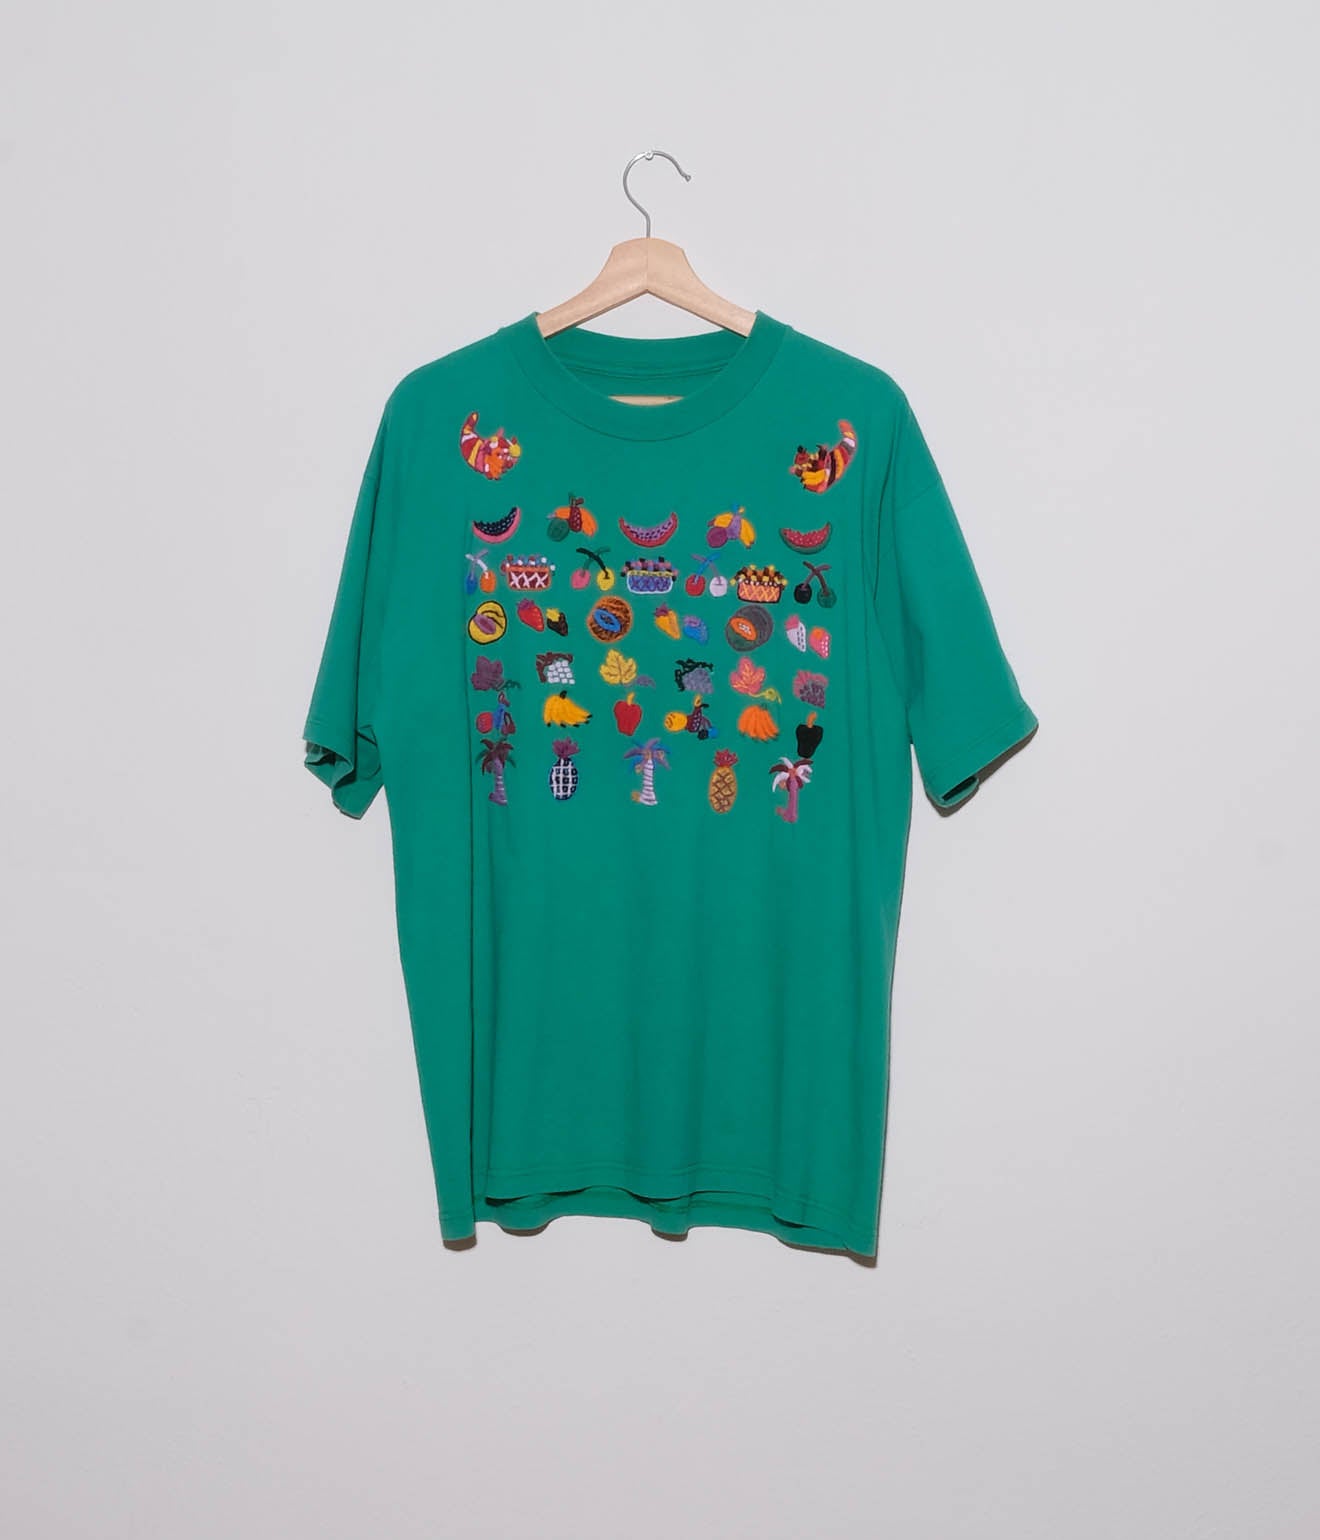 Mexican Embroidery Short Sleeve Tee Shirt (Green)